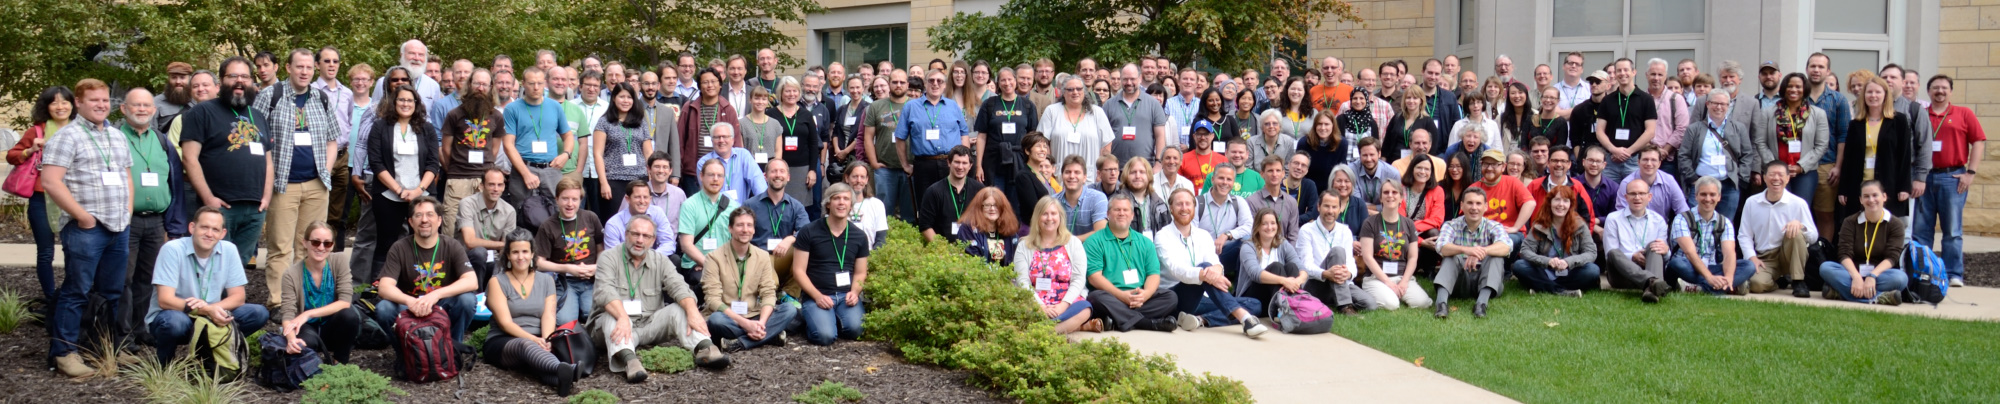 HydraConnect 2015 Group Photo